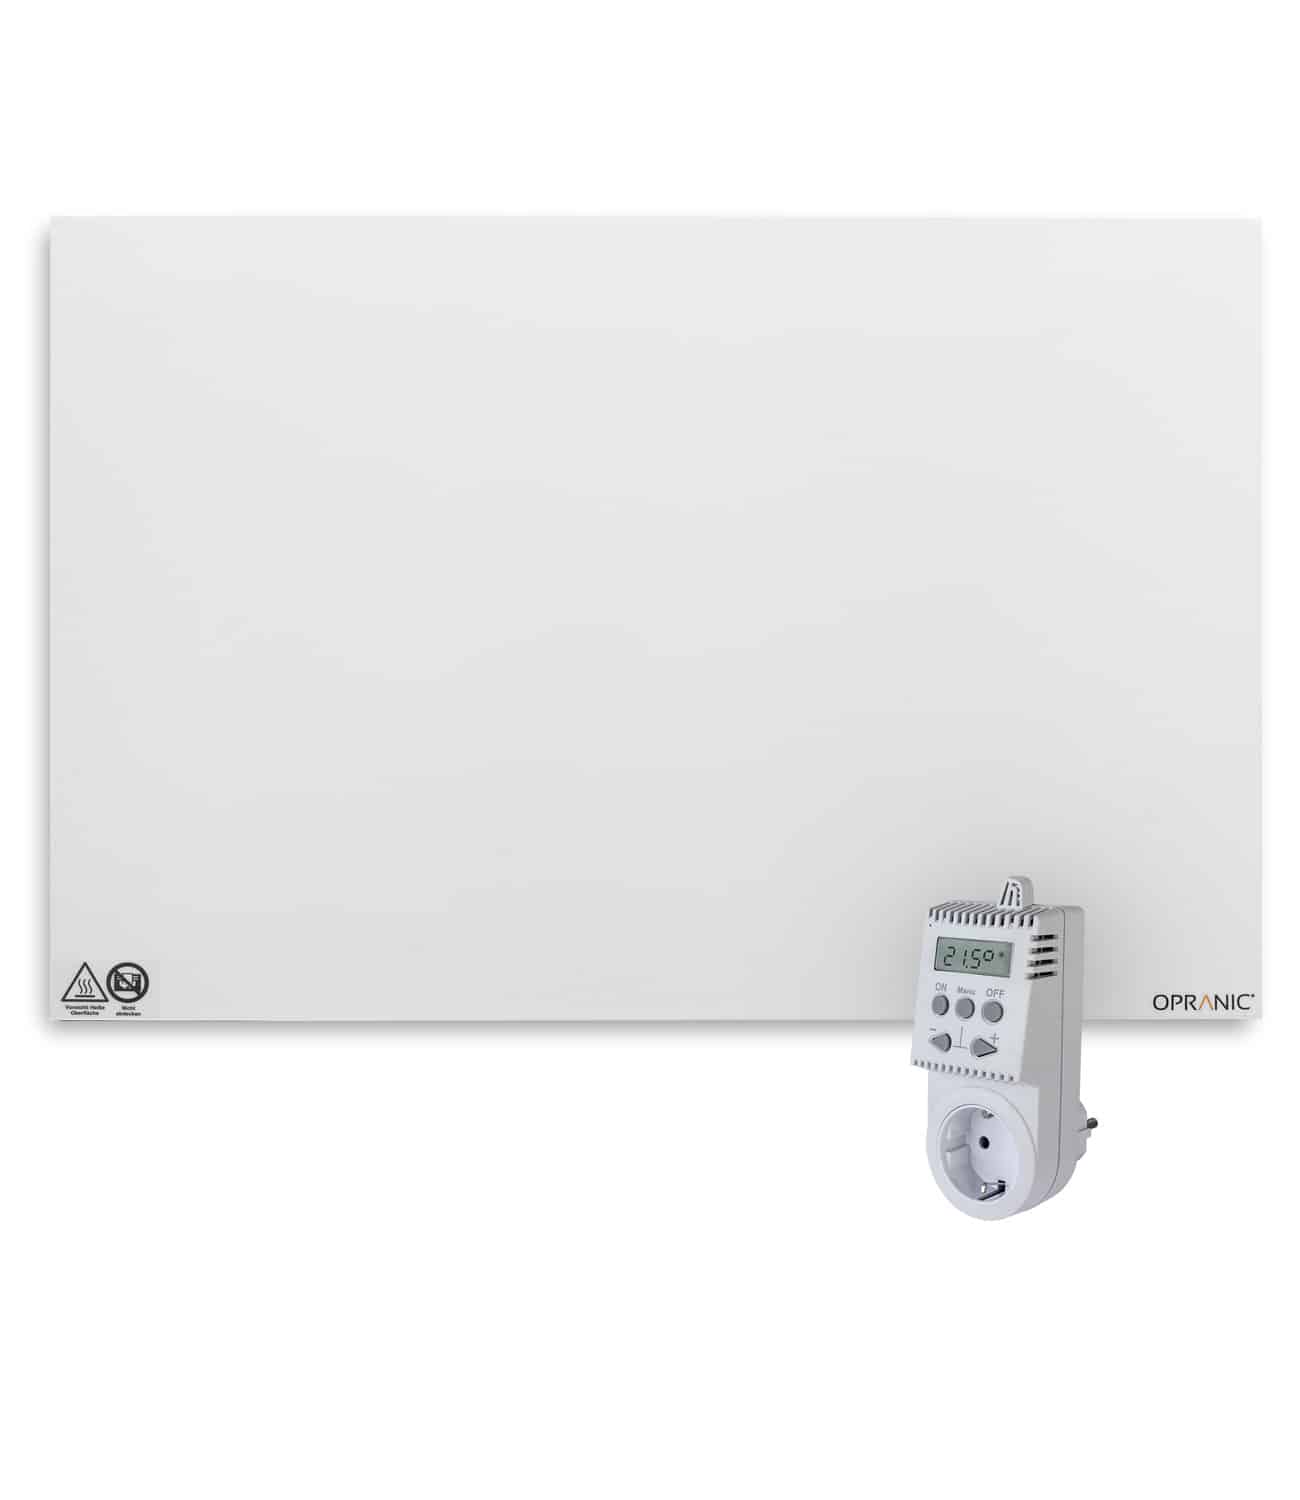 OPRANIC P5, Metal 300W, Infrared Panel Heater and OT50 Thermostat